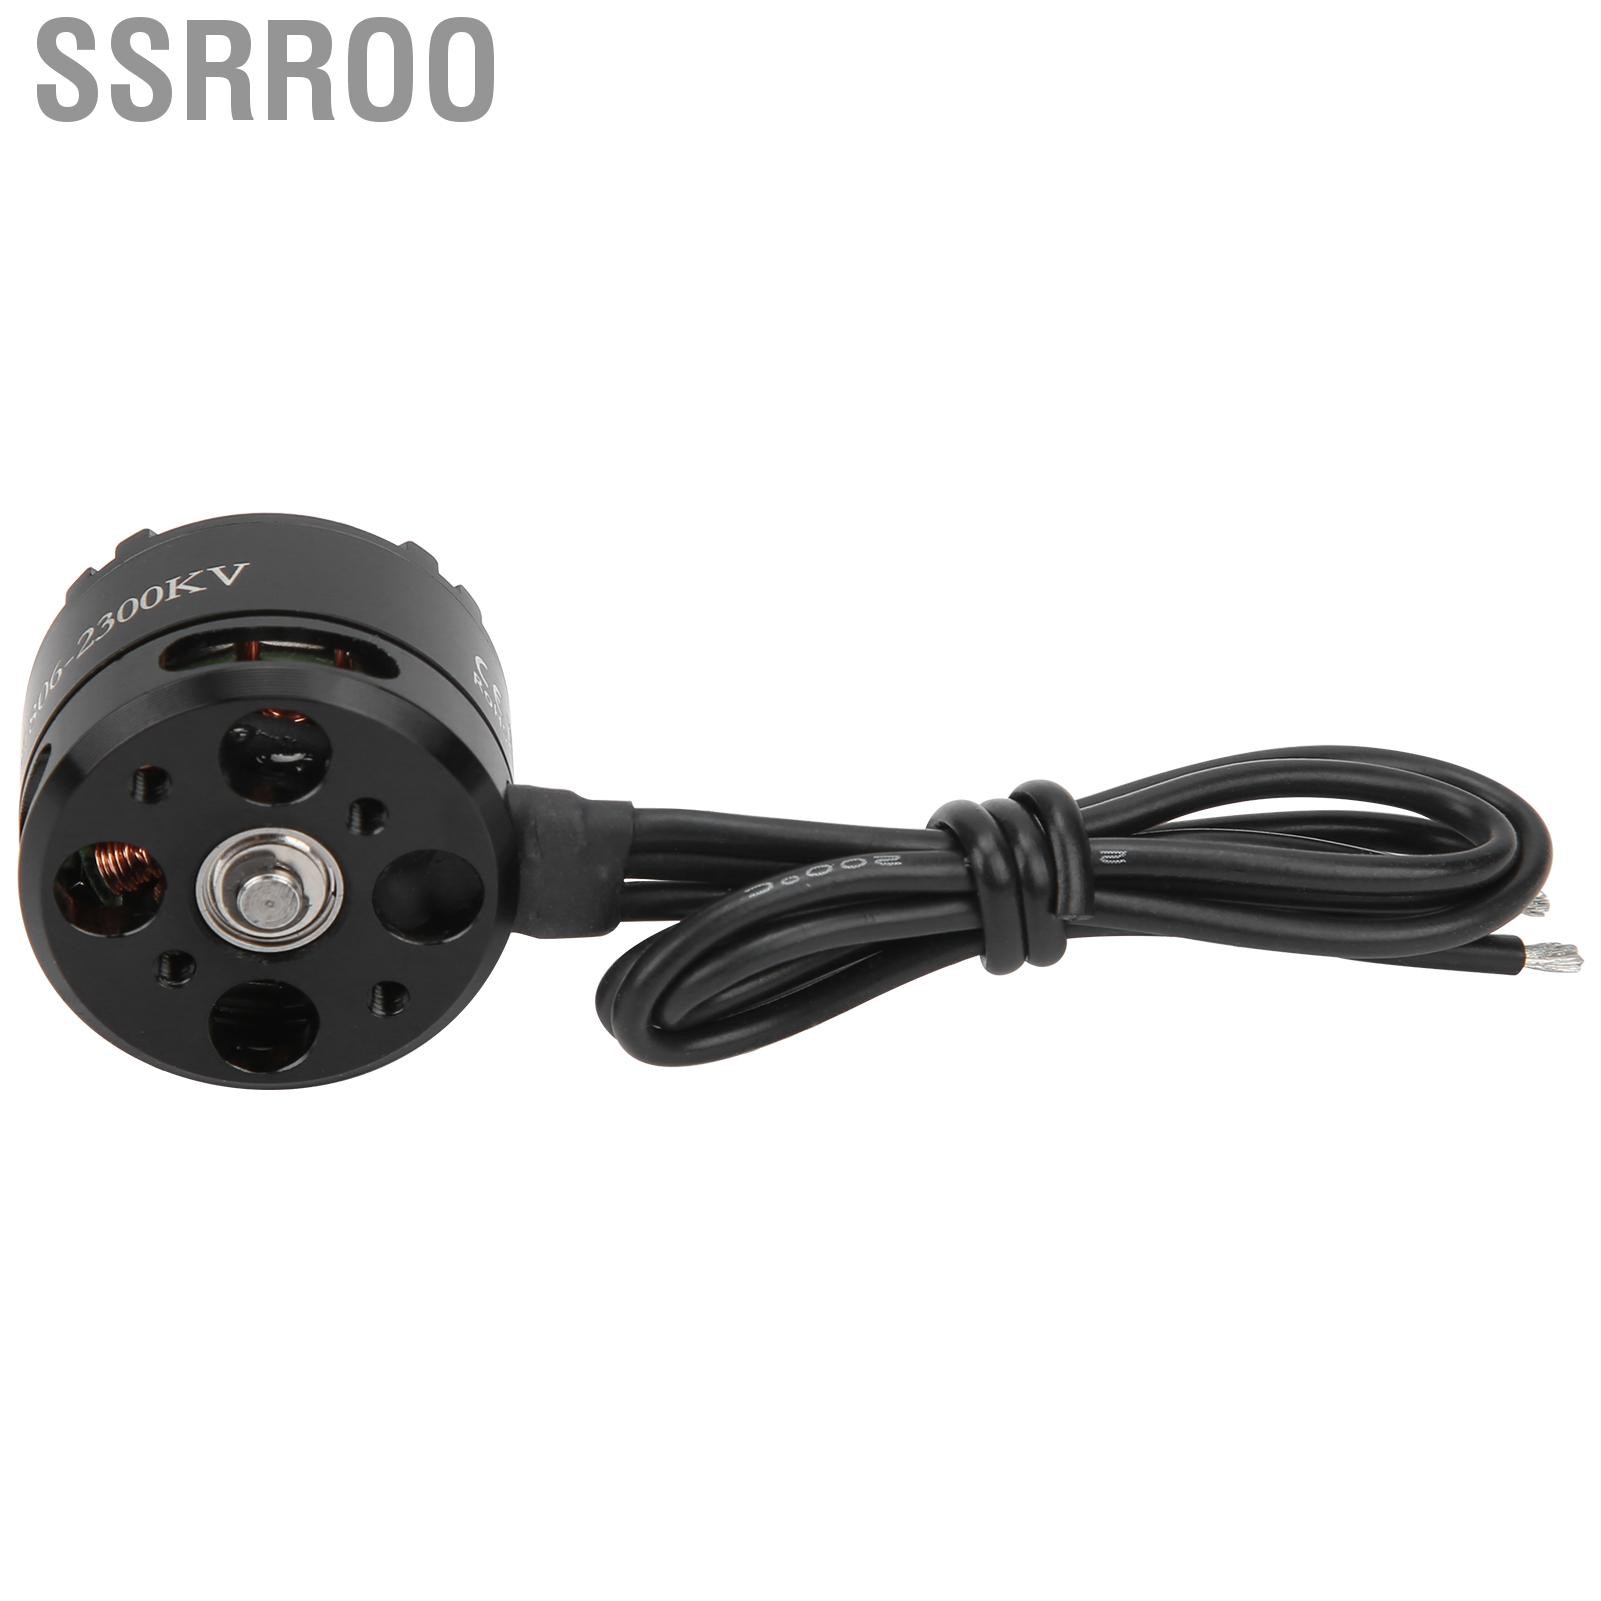 Ssrroo BE1806 2300KV Brushless Motor Replacement with Adapter Fit for RC Quadcopter/Multicopters